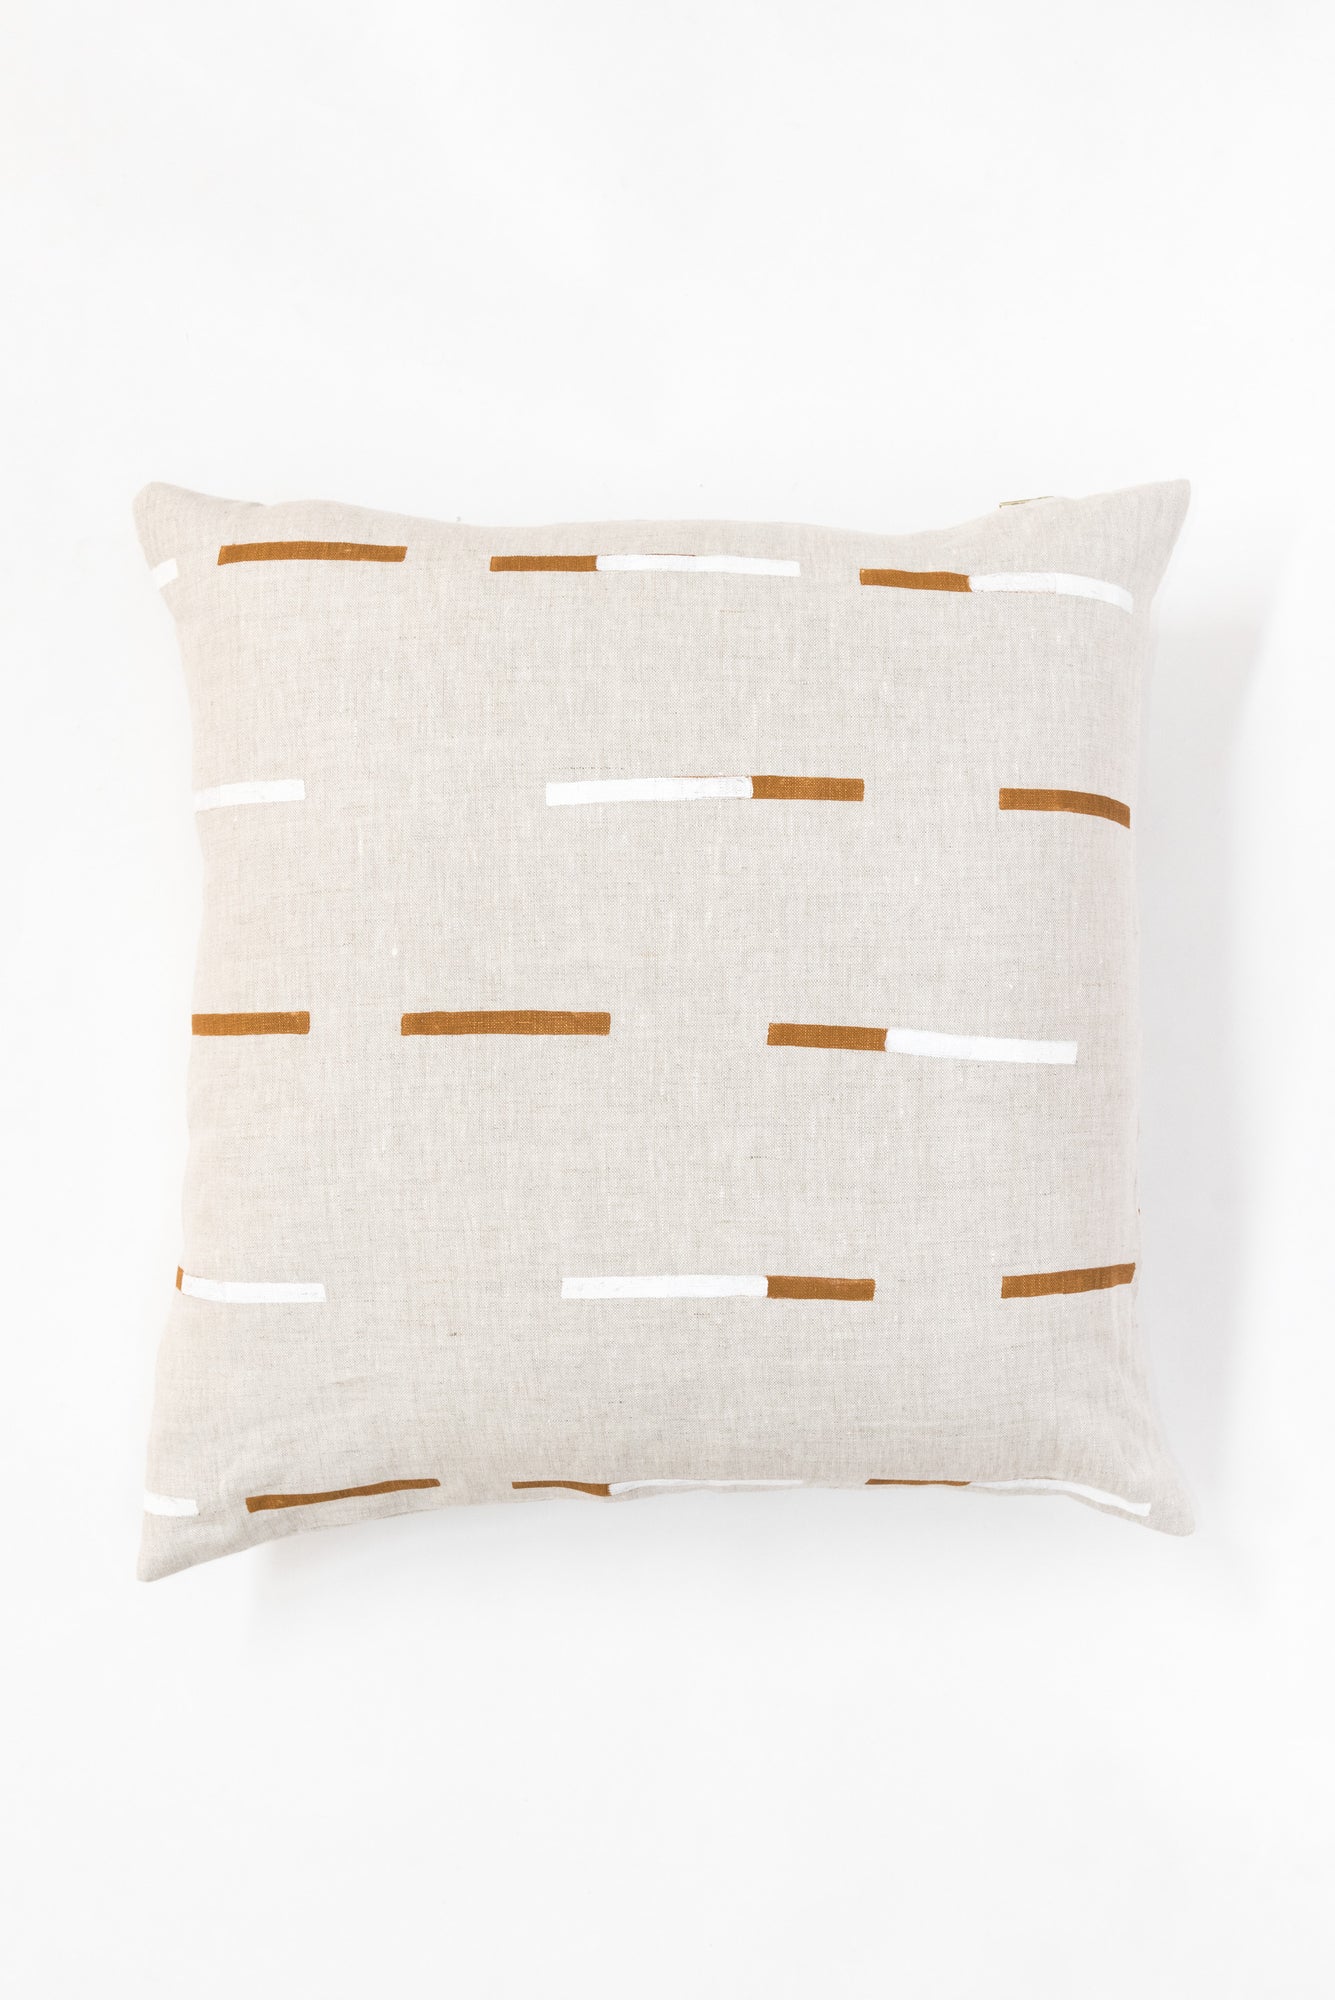 Overlapping Dashes Pillow - Tan